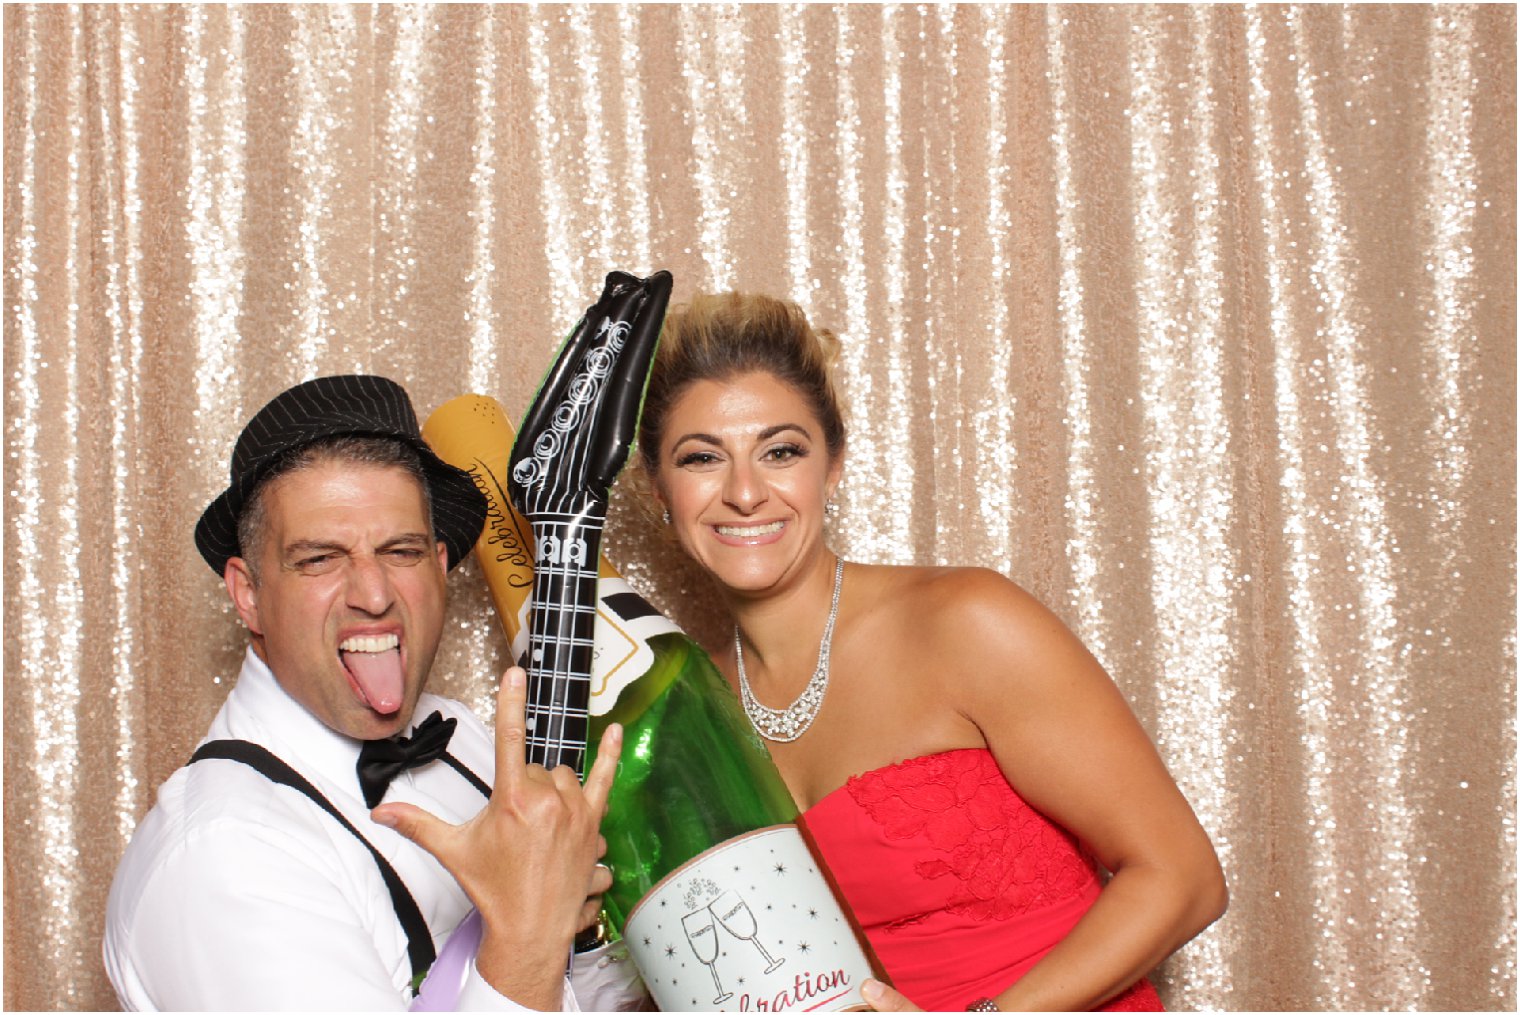 Park Chateau Estate and Gardens Wedding Photo Booth